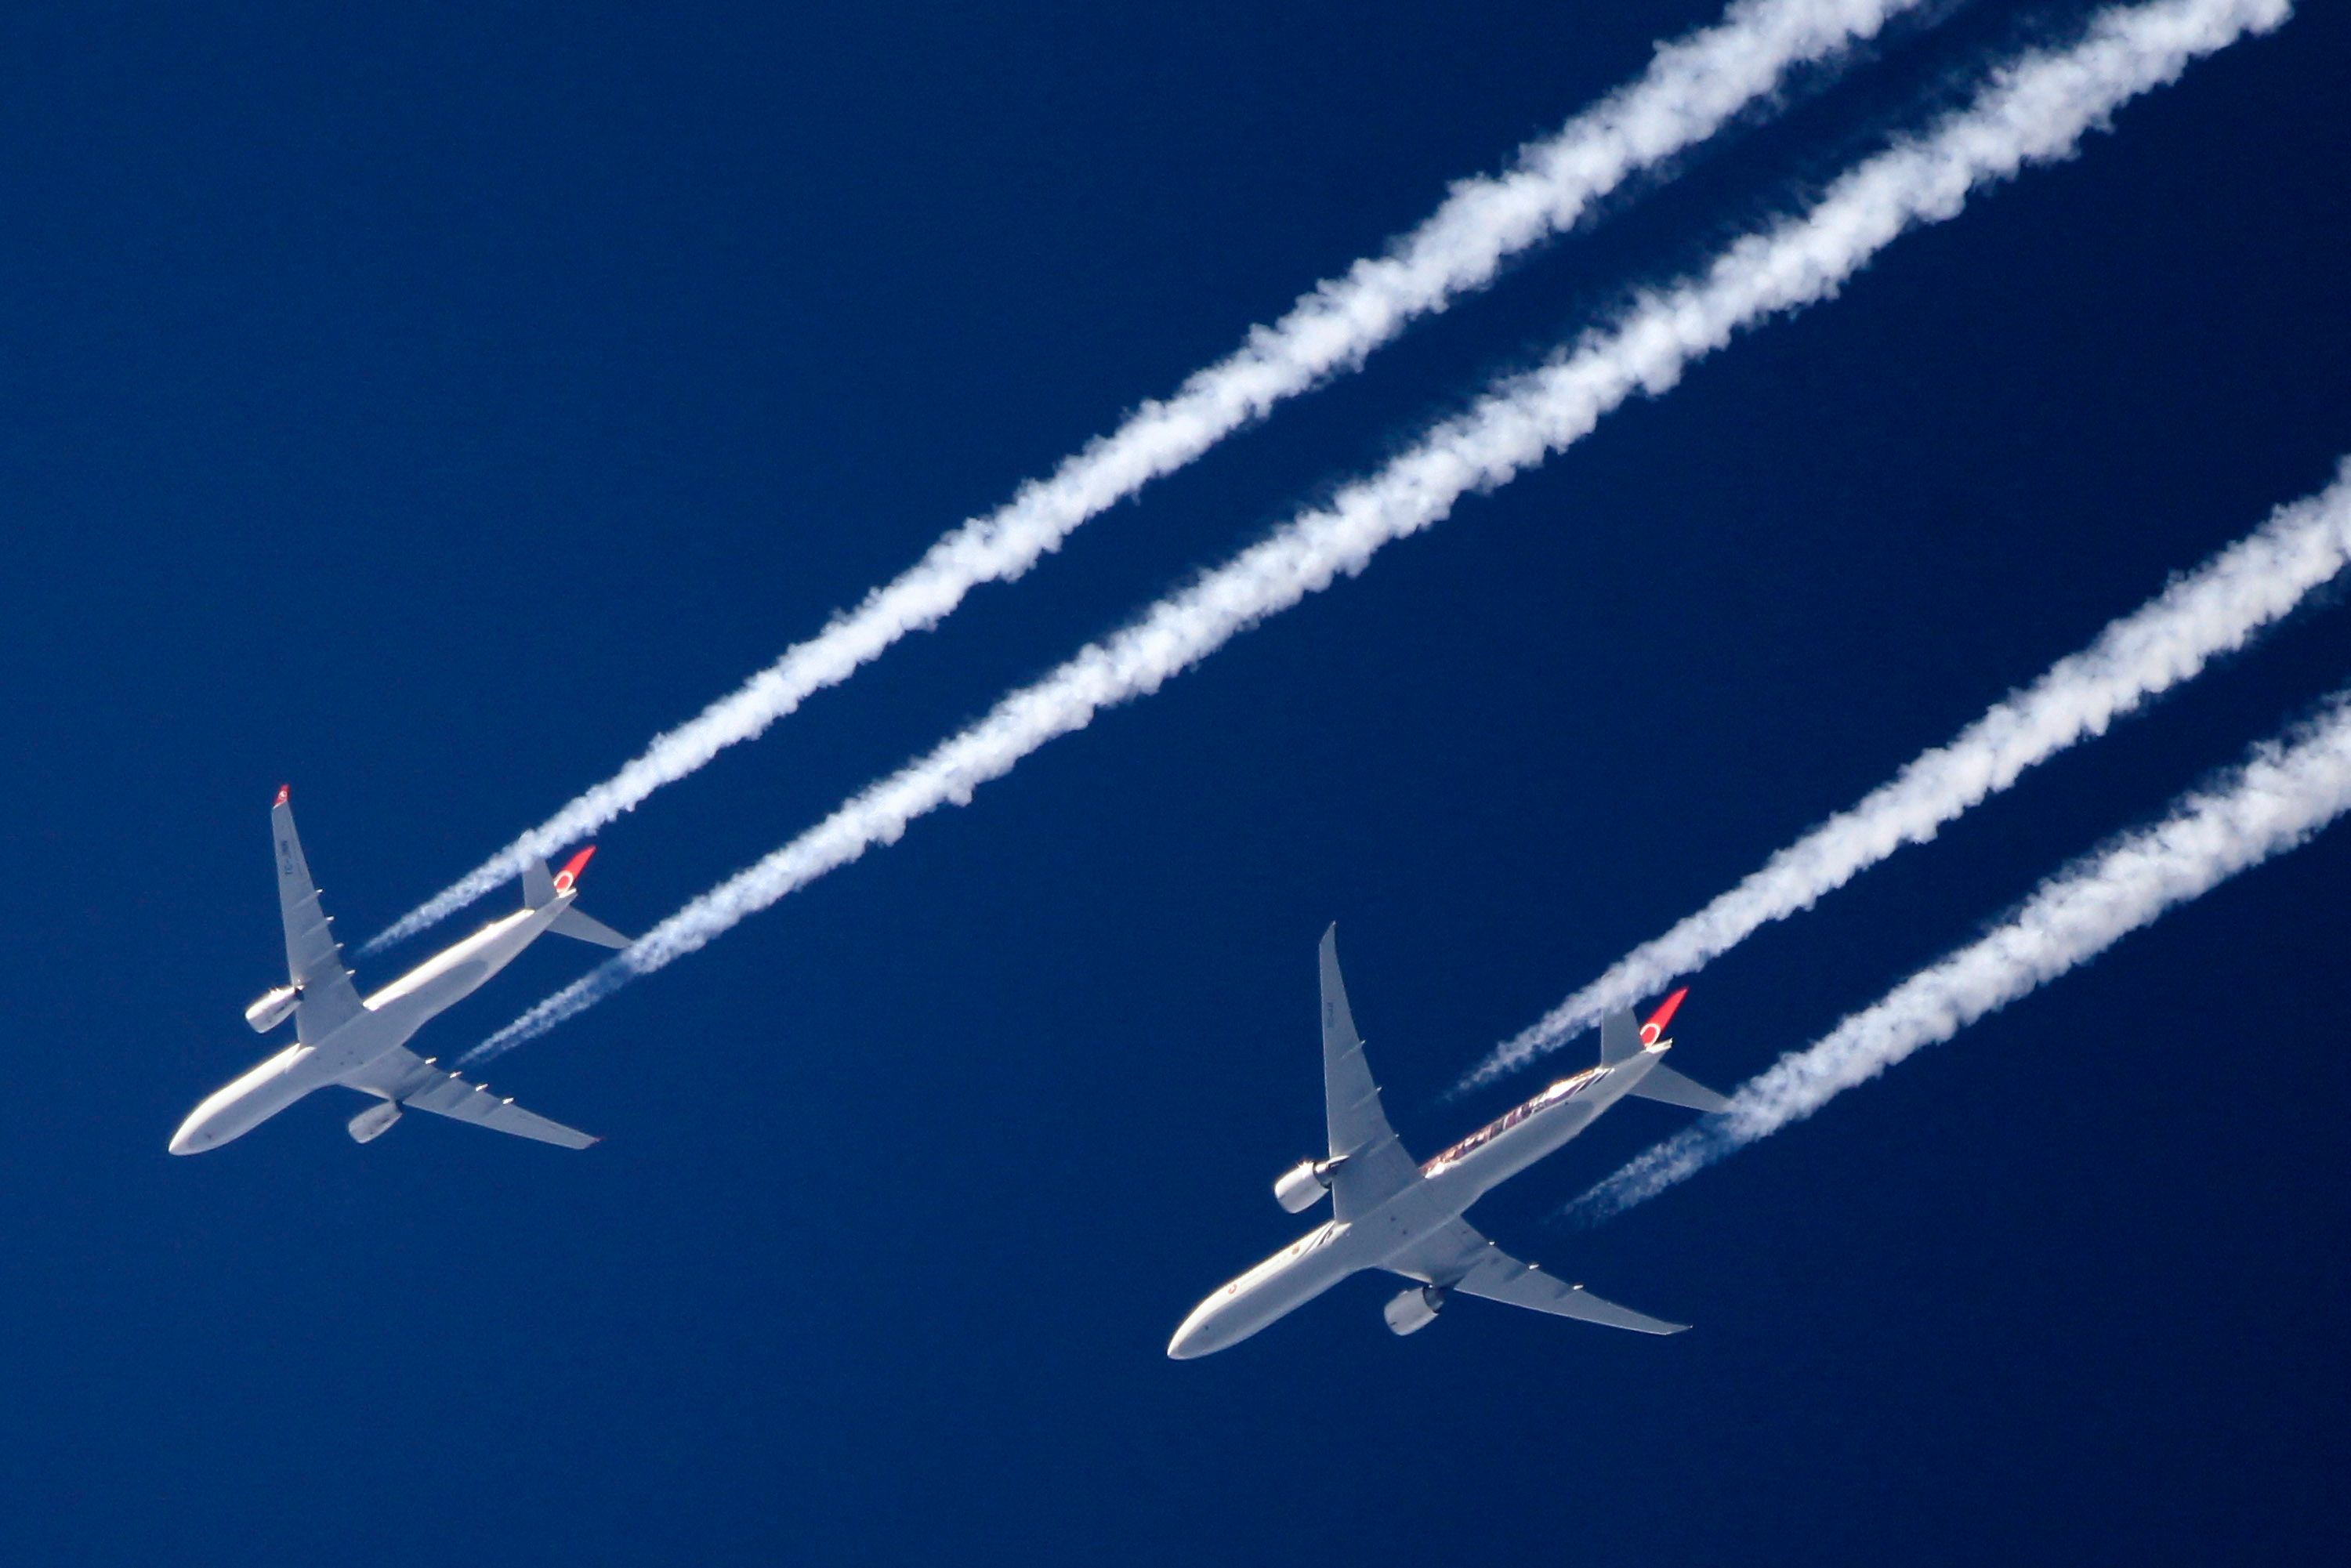 Two airplanes mid flight